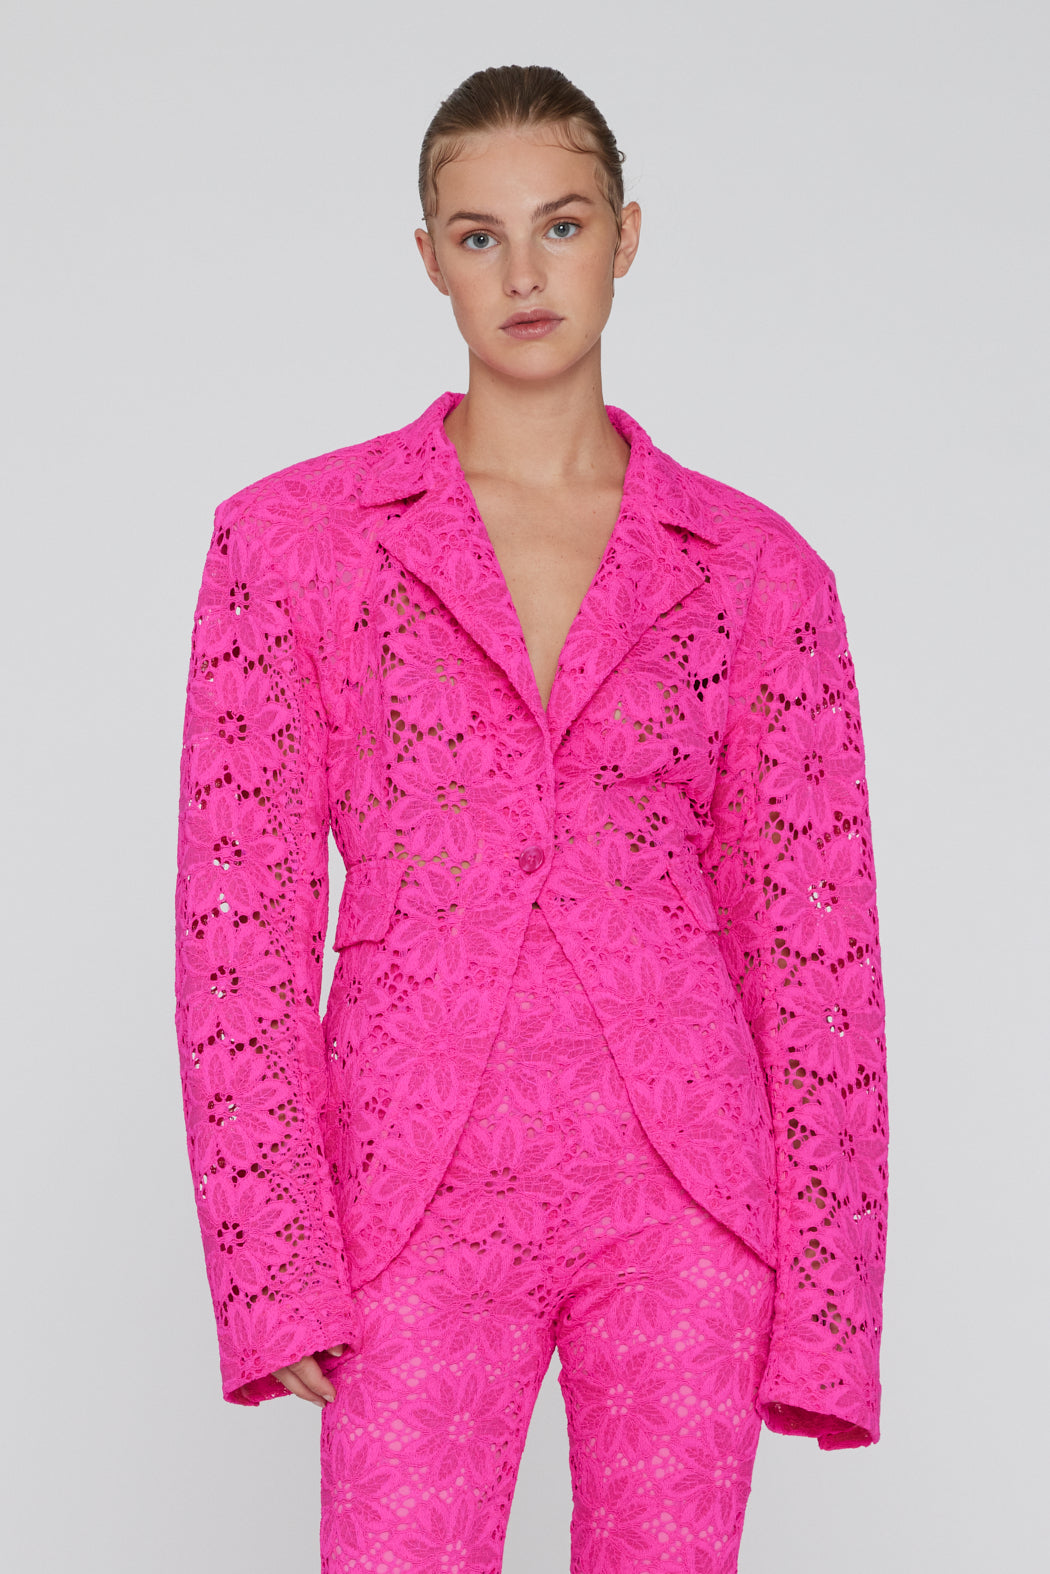 Lace Figure Fitted Blazer, hot pink